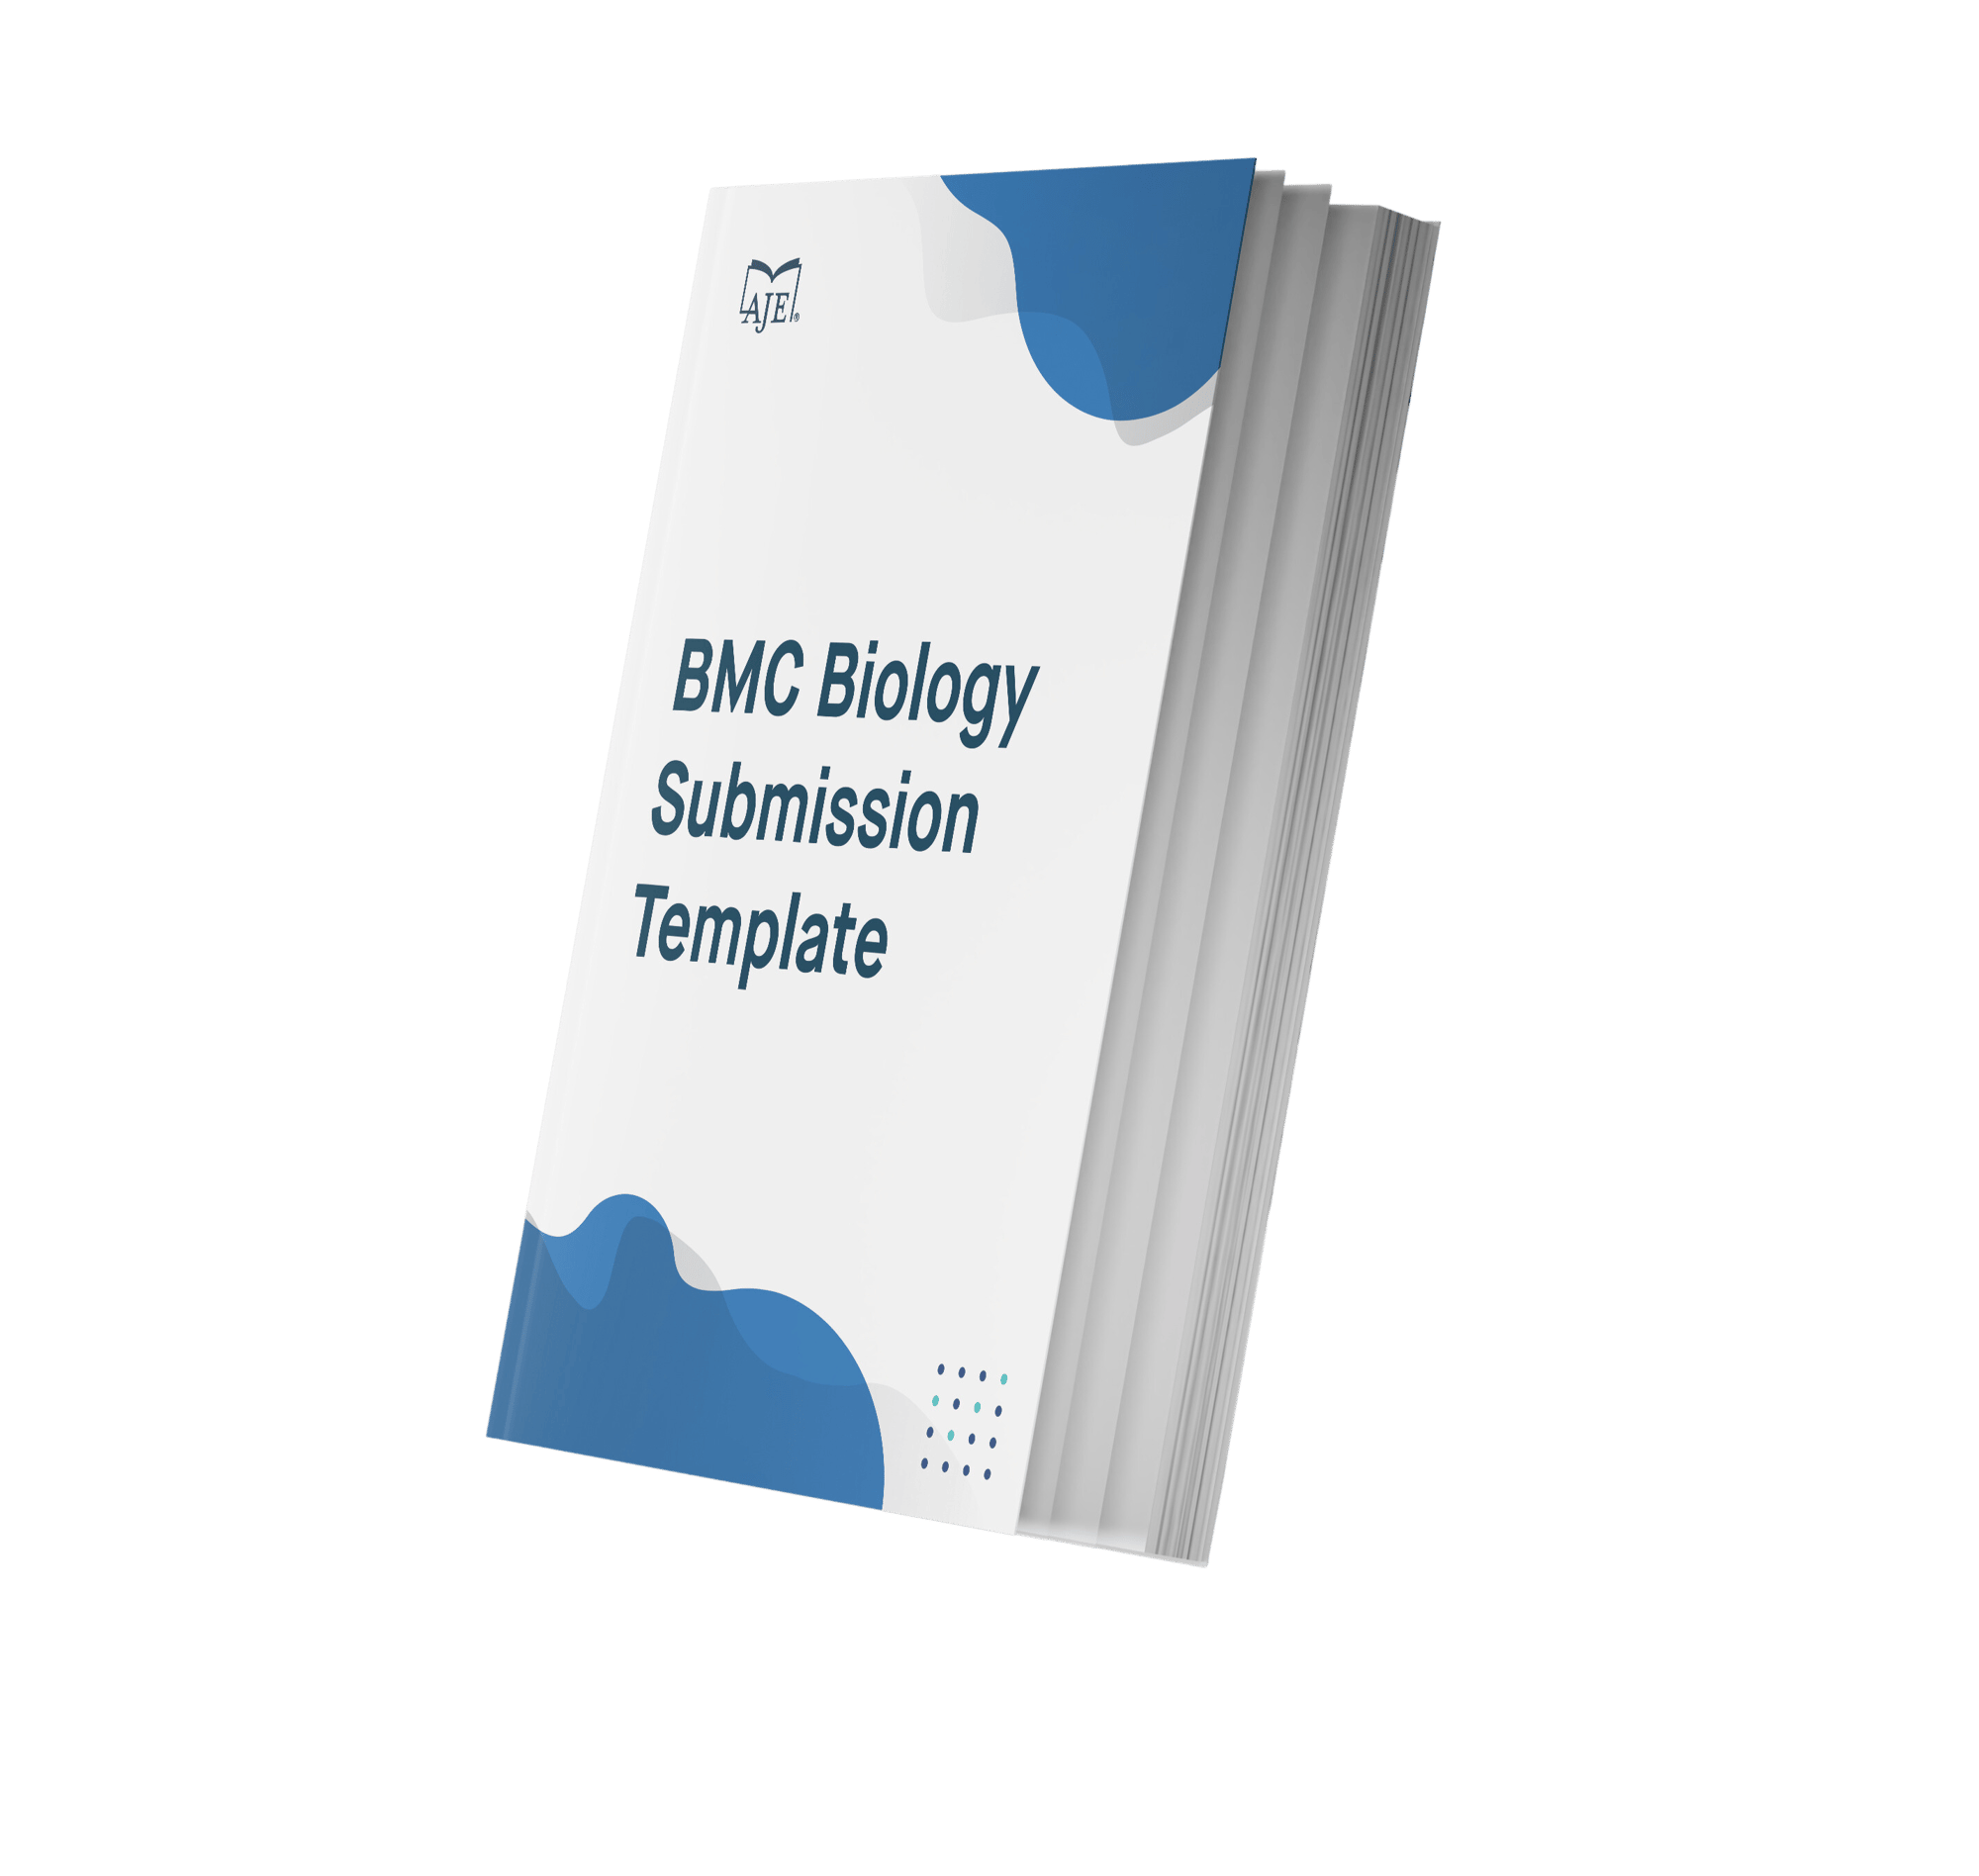 bmc-biology-submission-template-resource